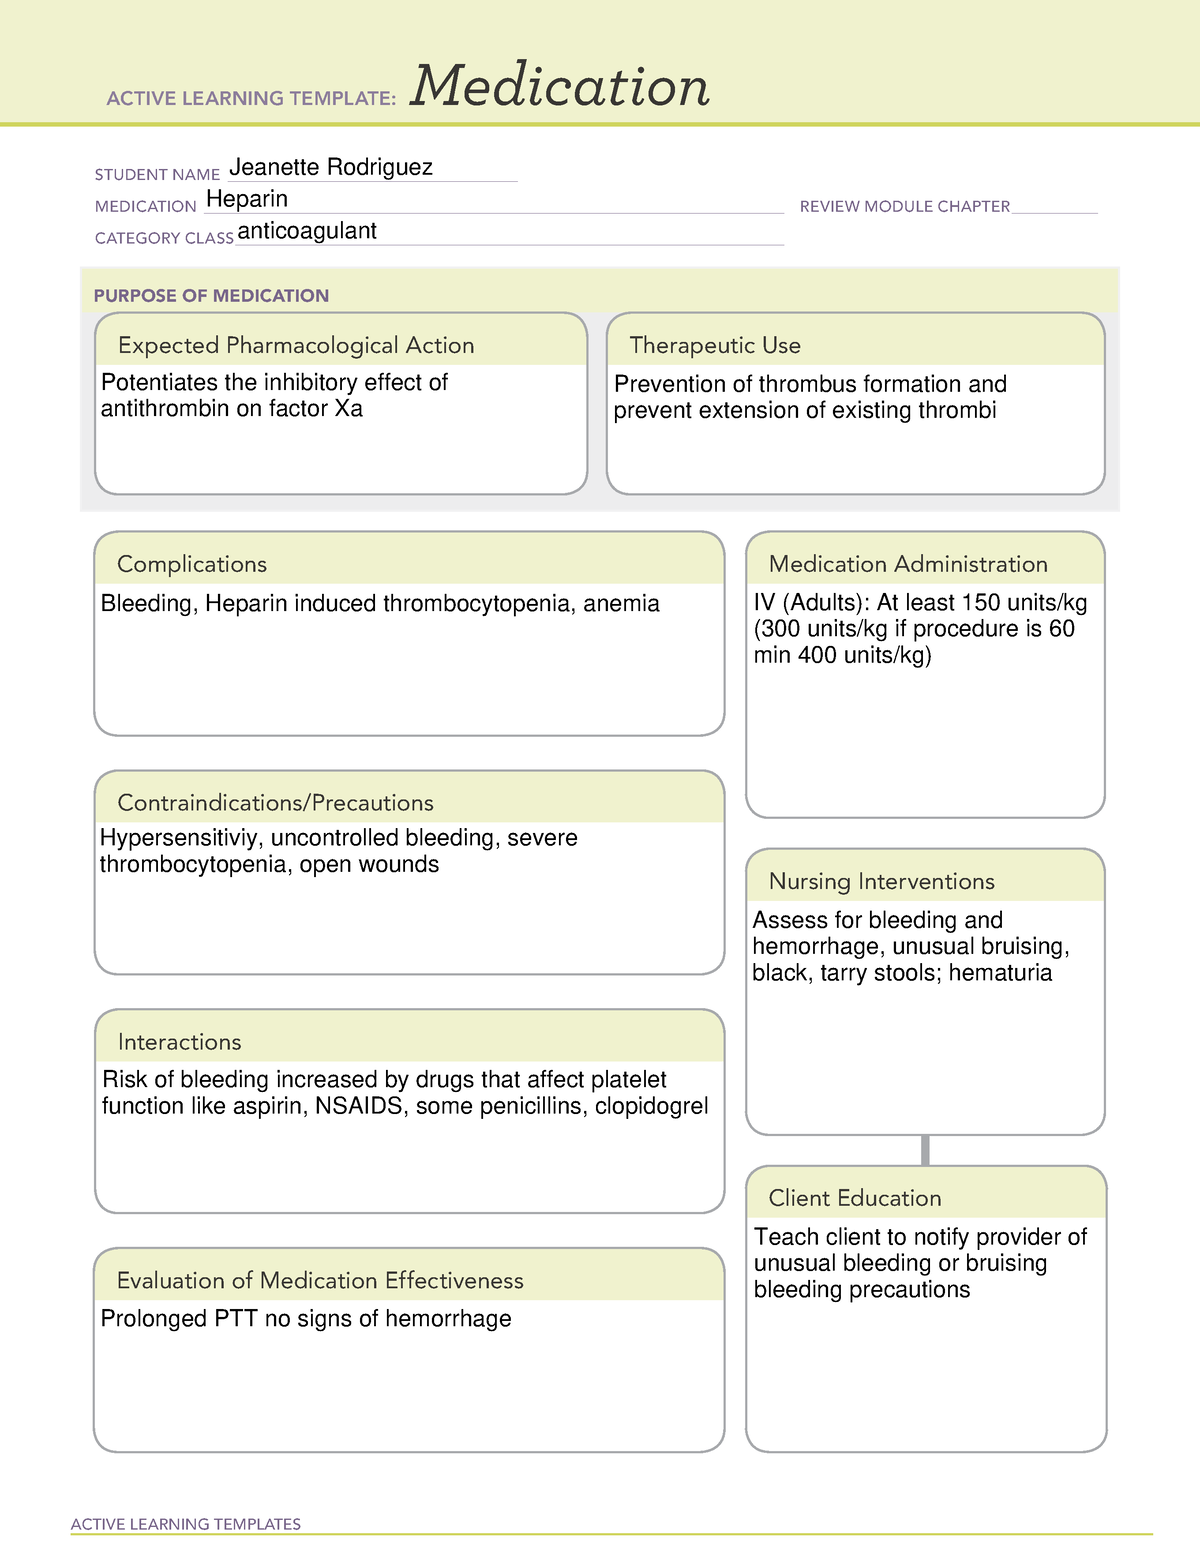 Heparin ati med card completed ACTIVE LEARNING TEMPLATES Medication